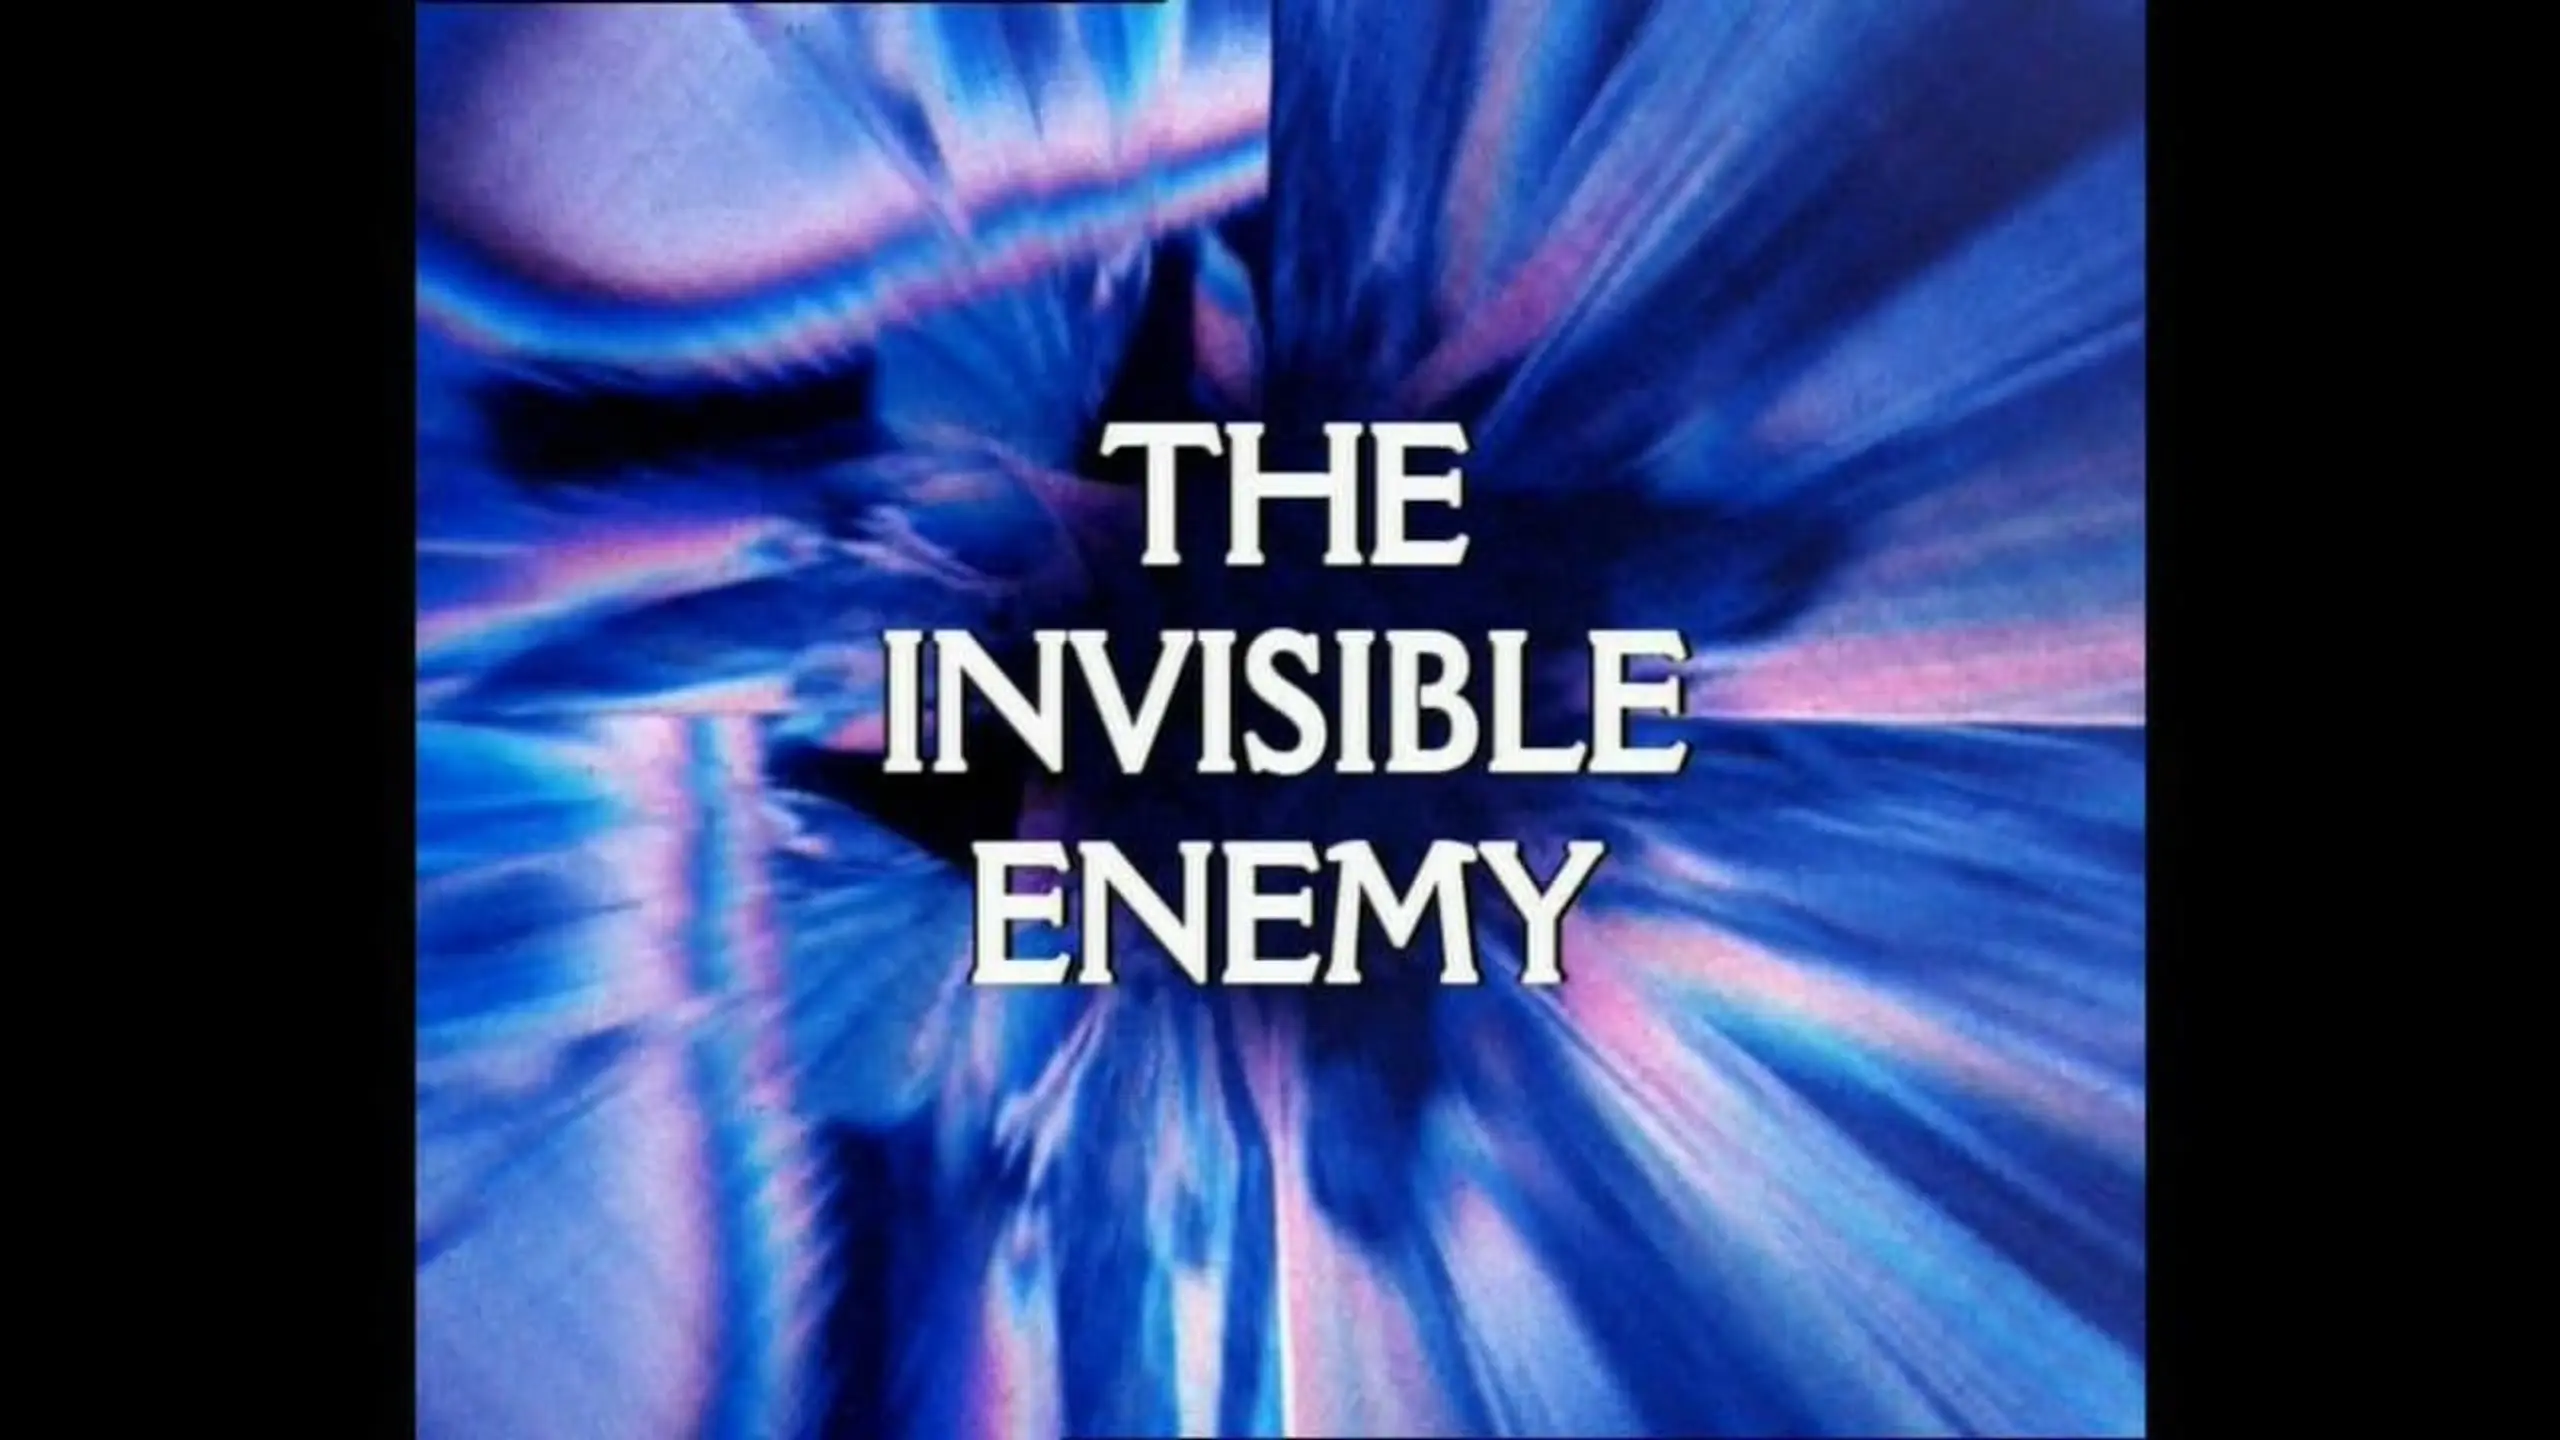 Doctor Who: The Invisible Enemy